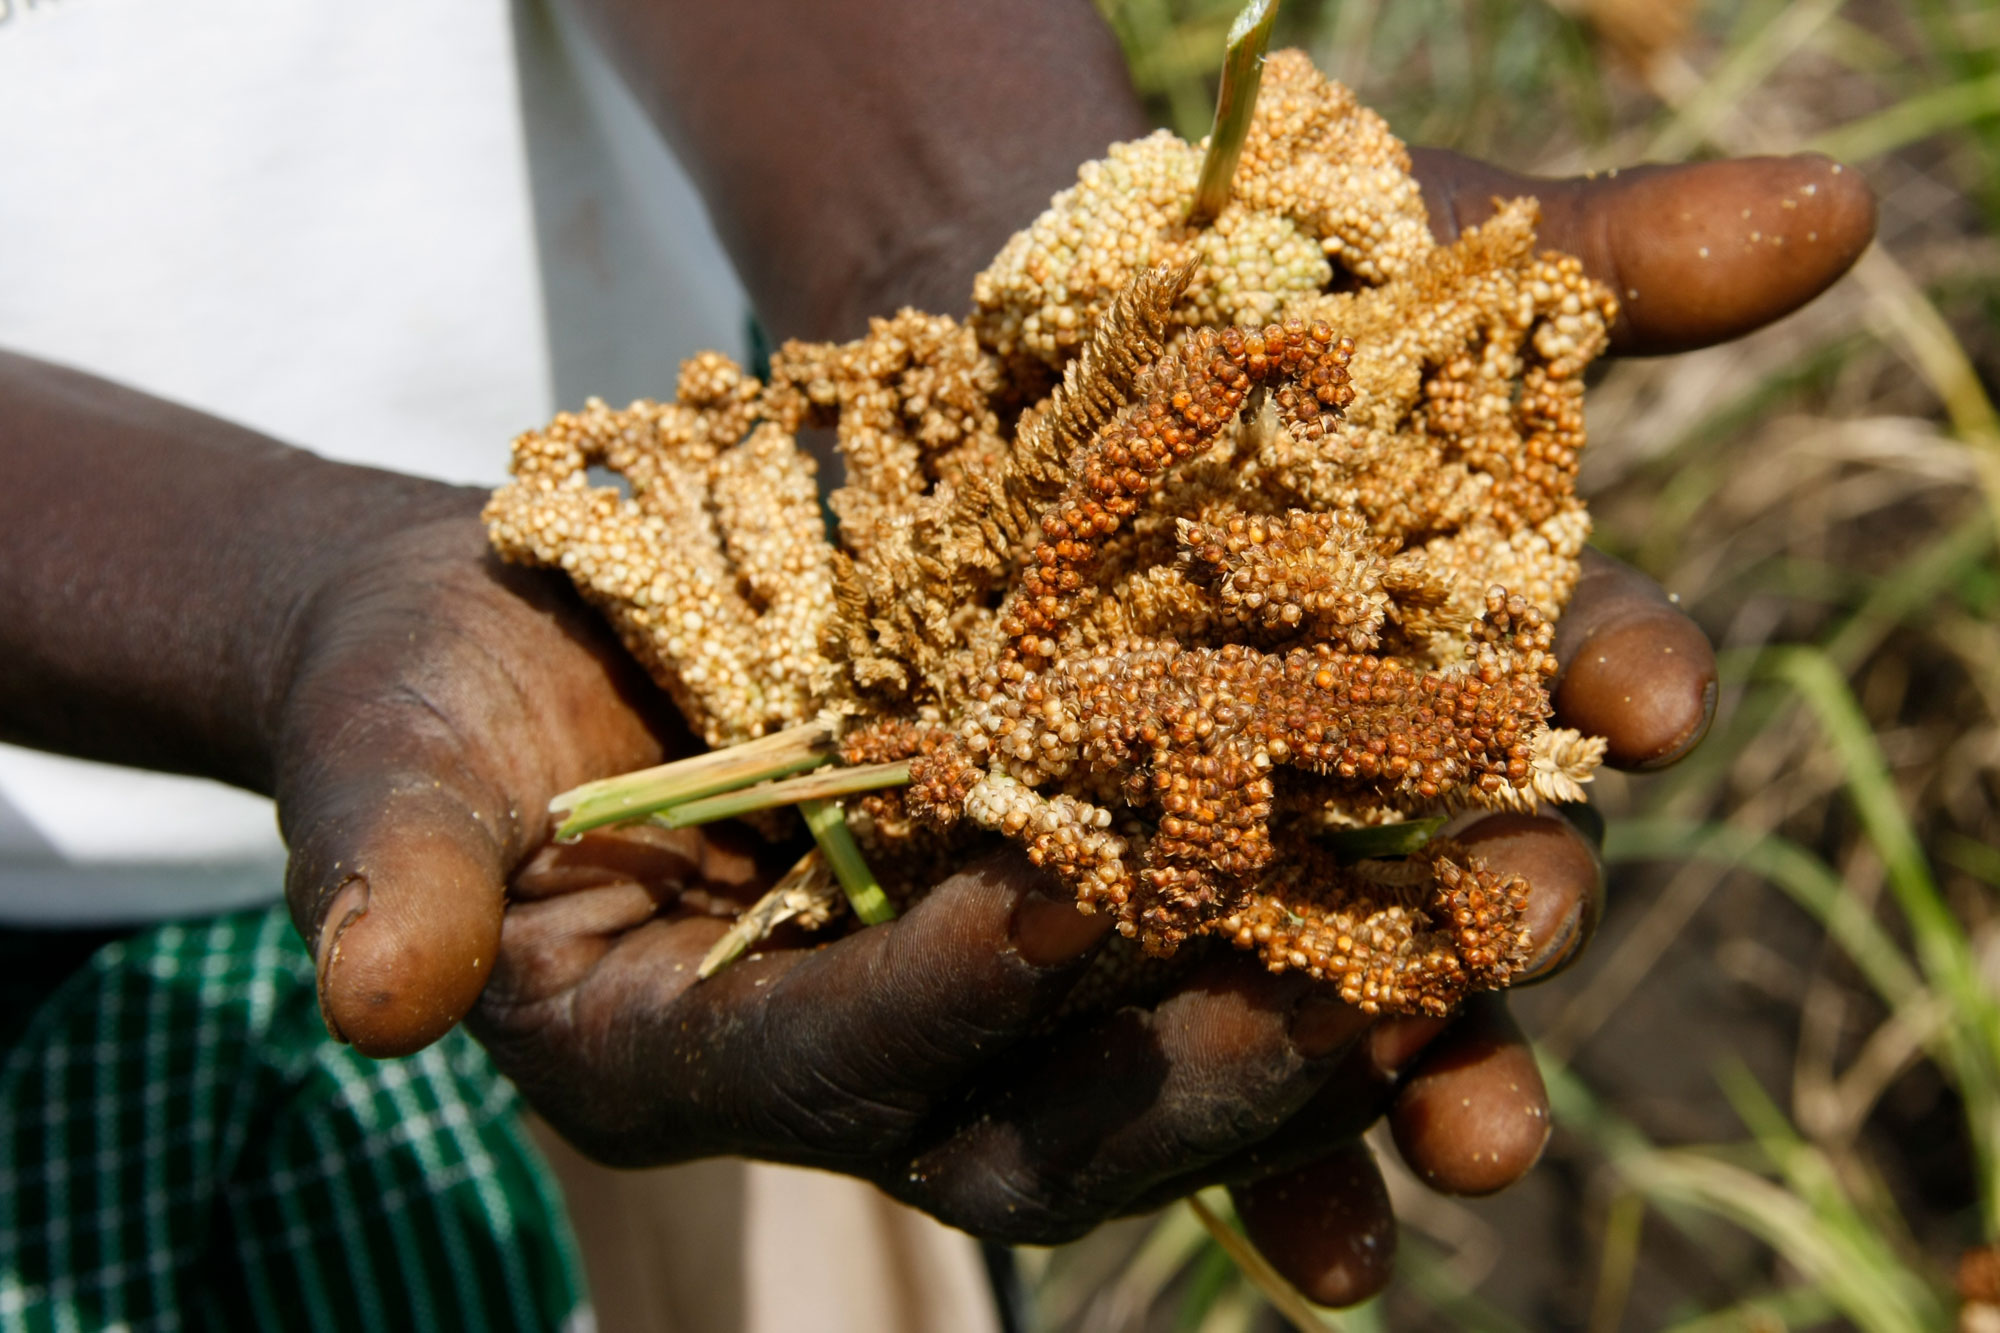 Photograph of a person holding ears of finger millet in their cupped hands.